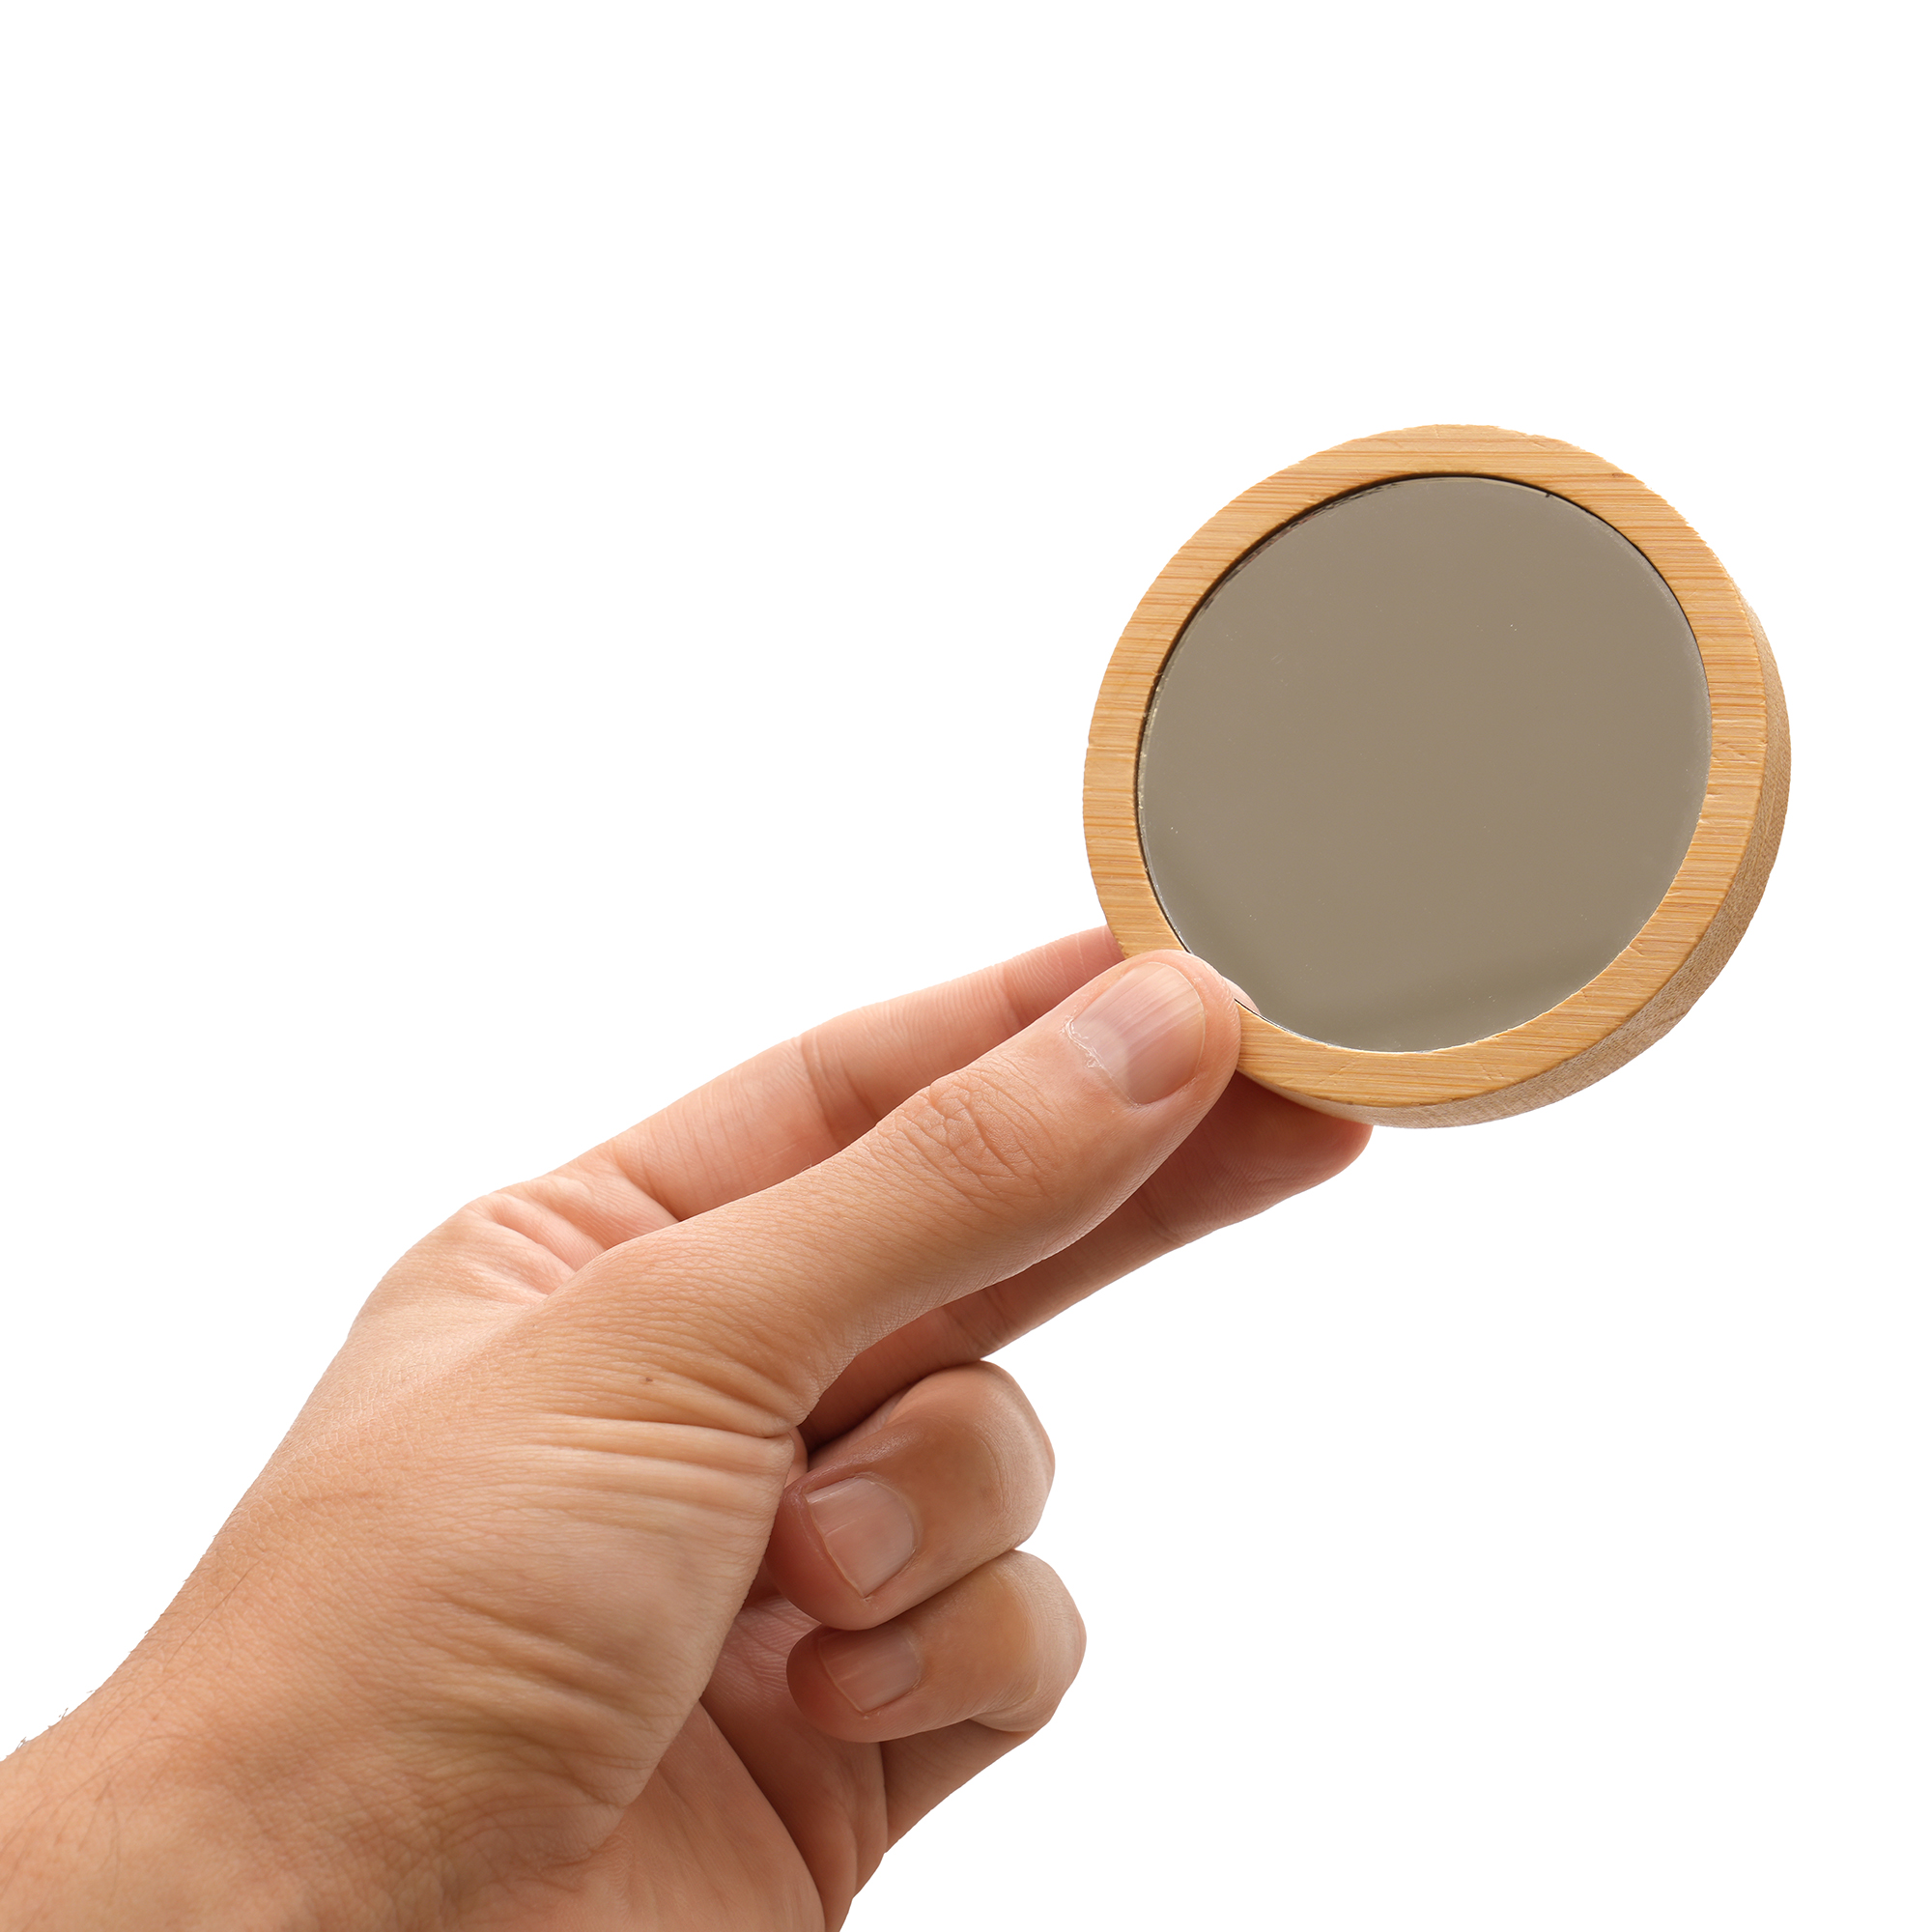 A round compact mirror in an eco-friendly bamboo casing with your choice of engraving or print to the back.